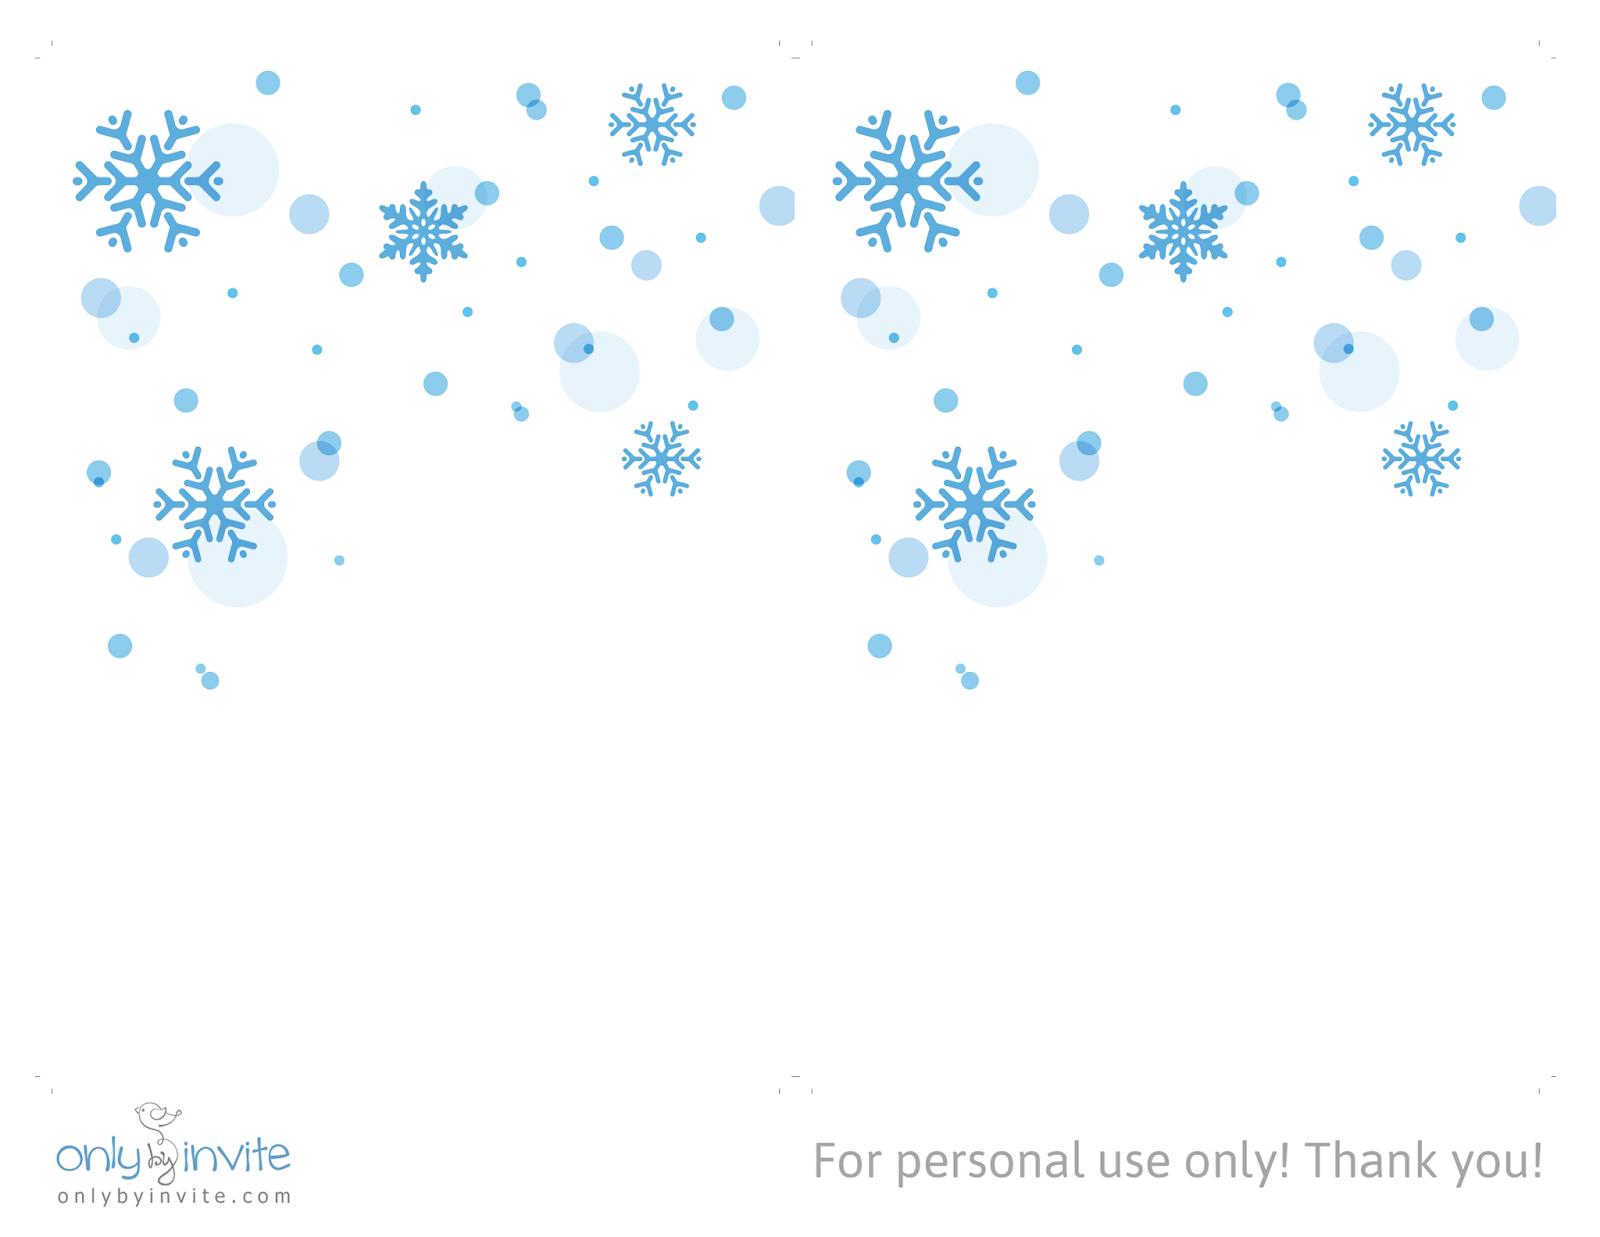 Free printables for happy occasions Free winter wedding invitation